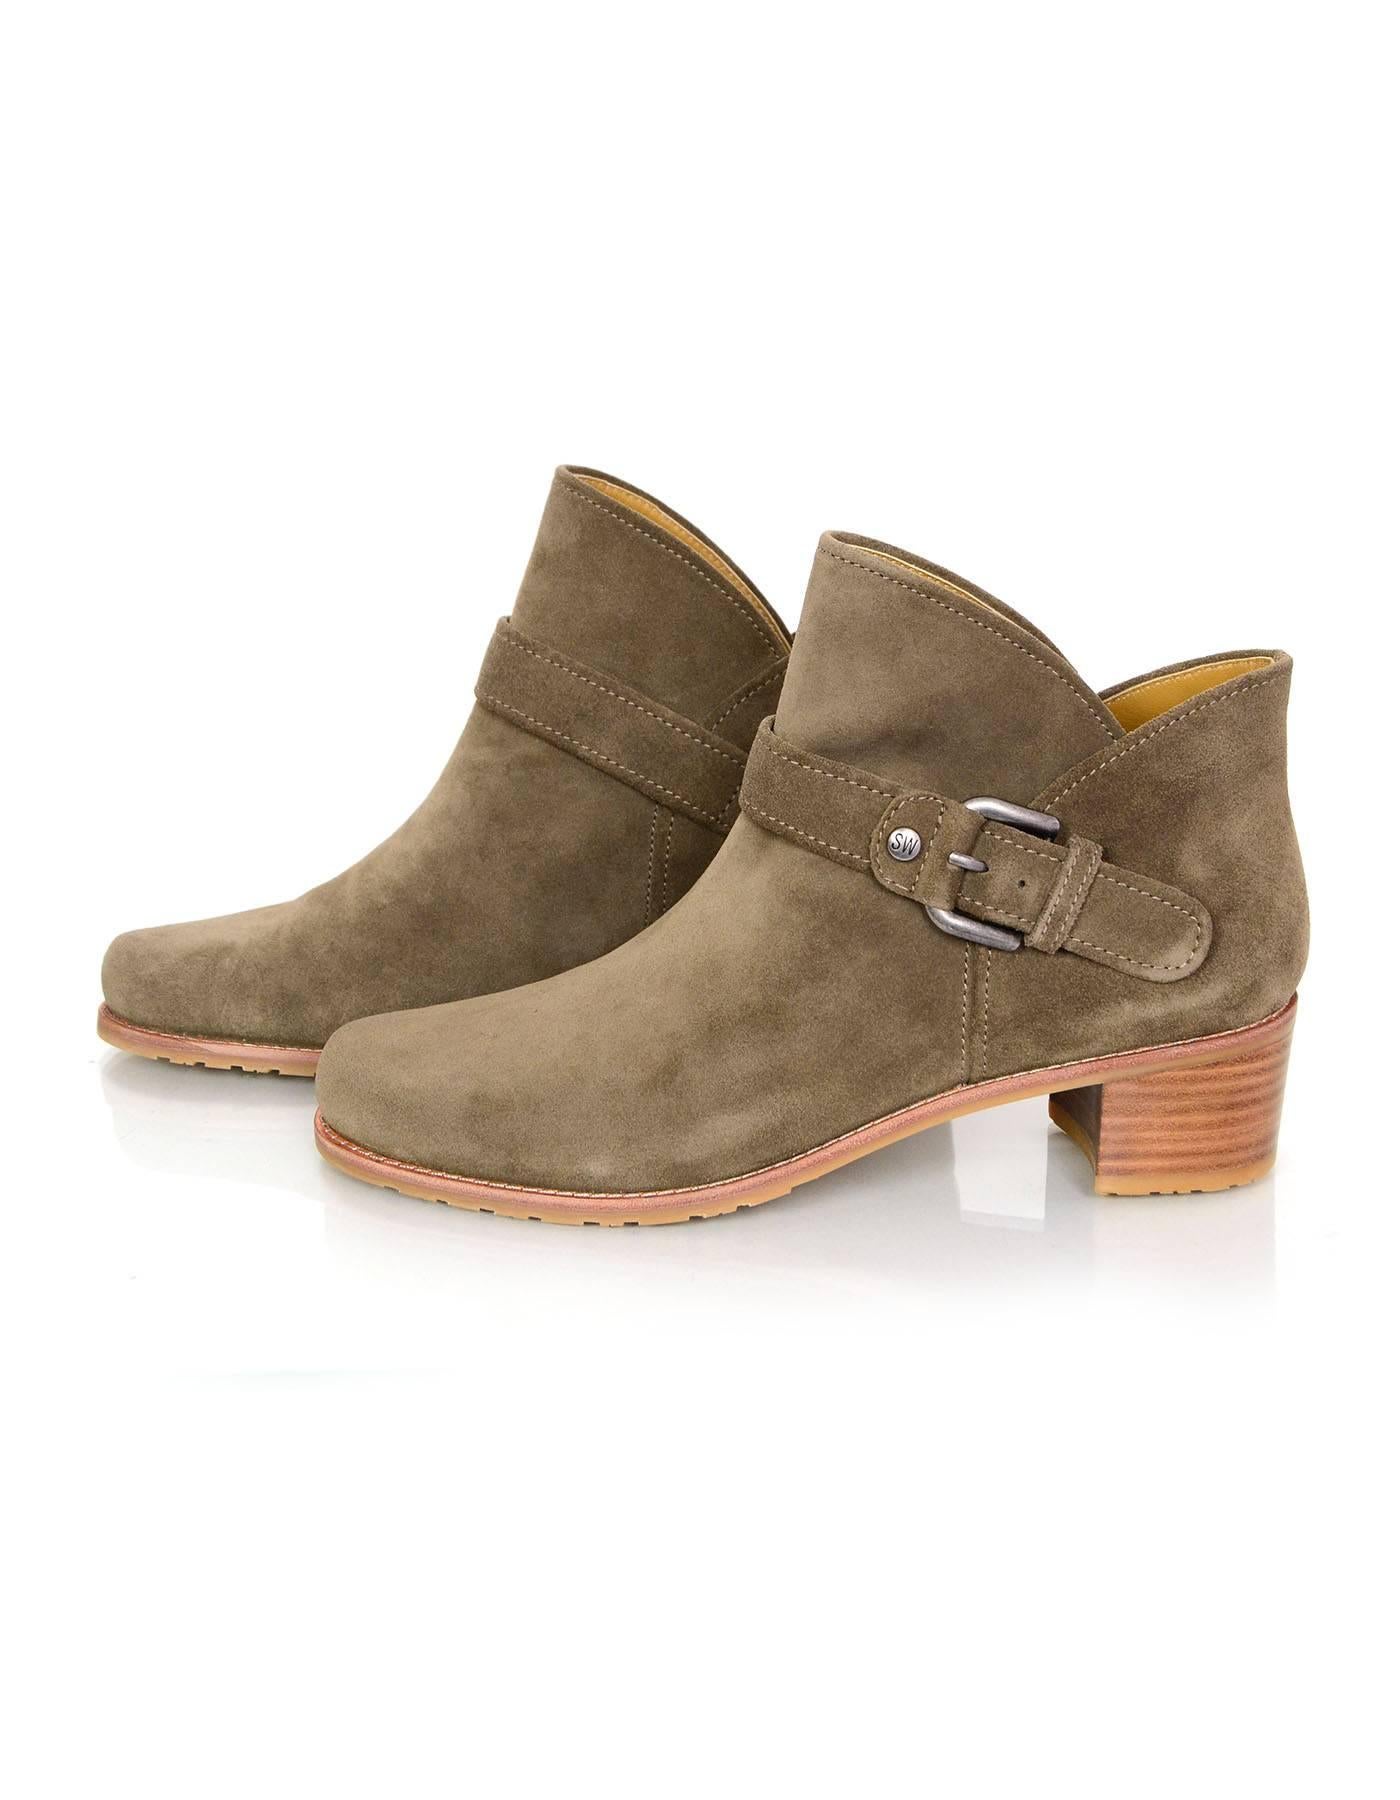 Stuart Weitzman Taupe Dude Suede Ankle Boots Sz 8.5 NEW

Made In: Spain
Color: Taupe
Materials: Suede
Closure/Opening: Pull on 
Sole Stamp: Stuart Made in Spain
Retail Price: $498 + tax
Overall Condition: Excellent pre-owned condition - New